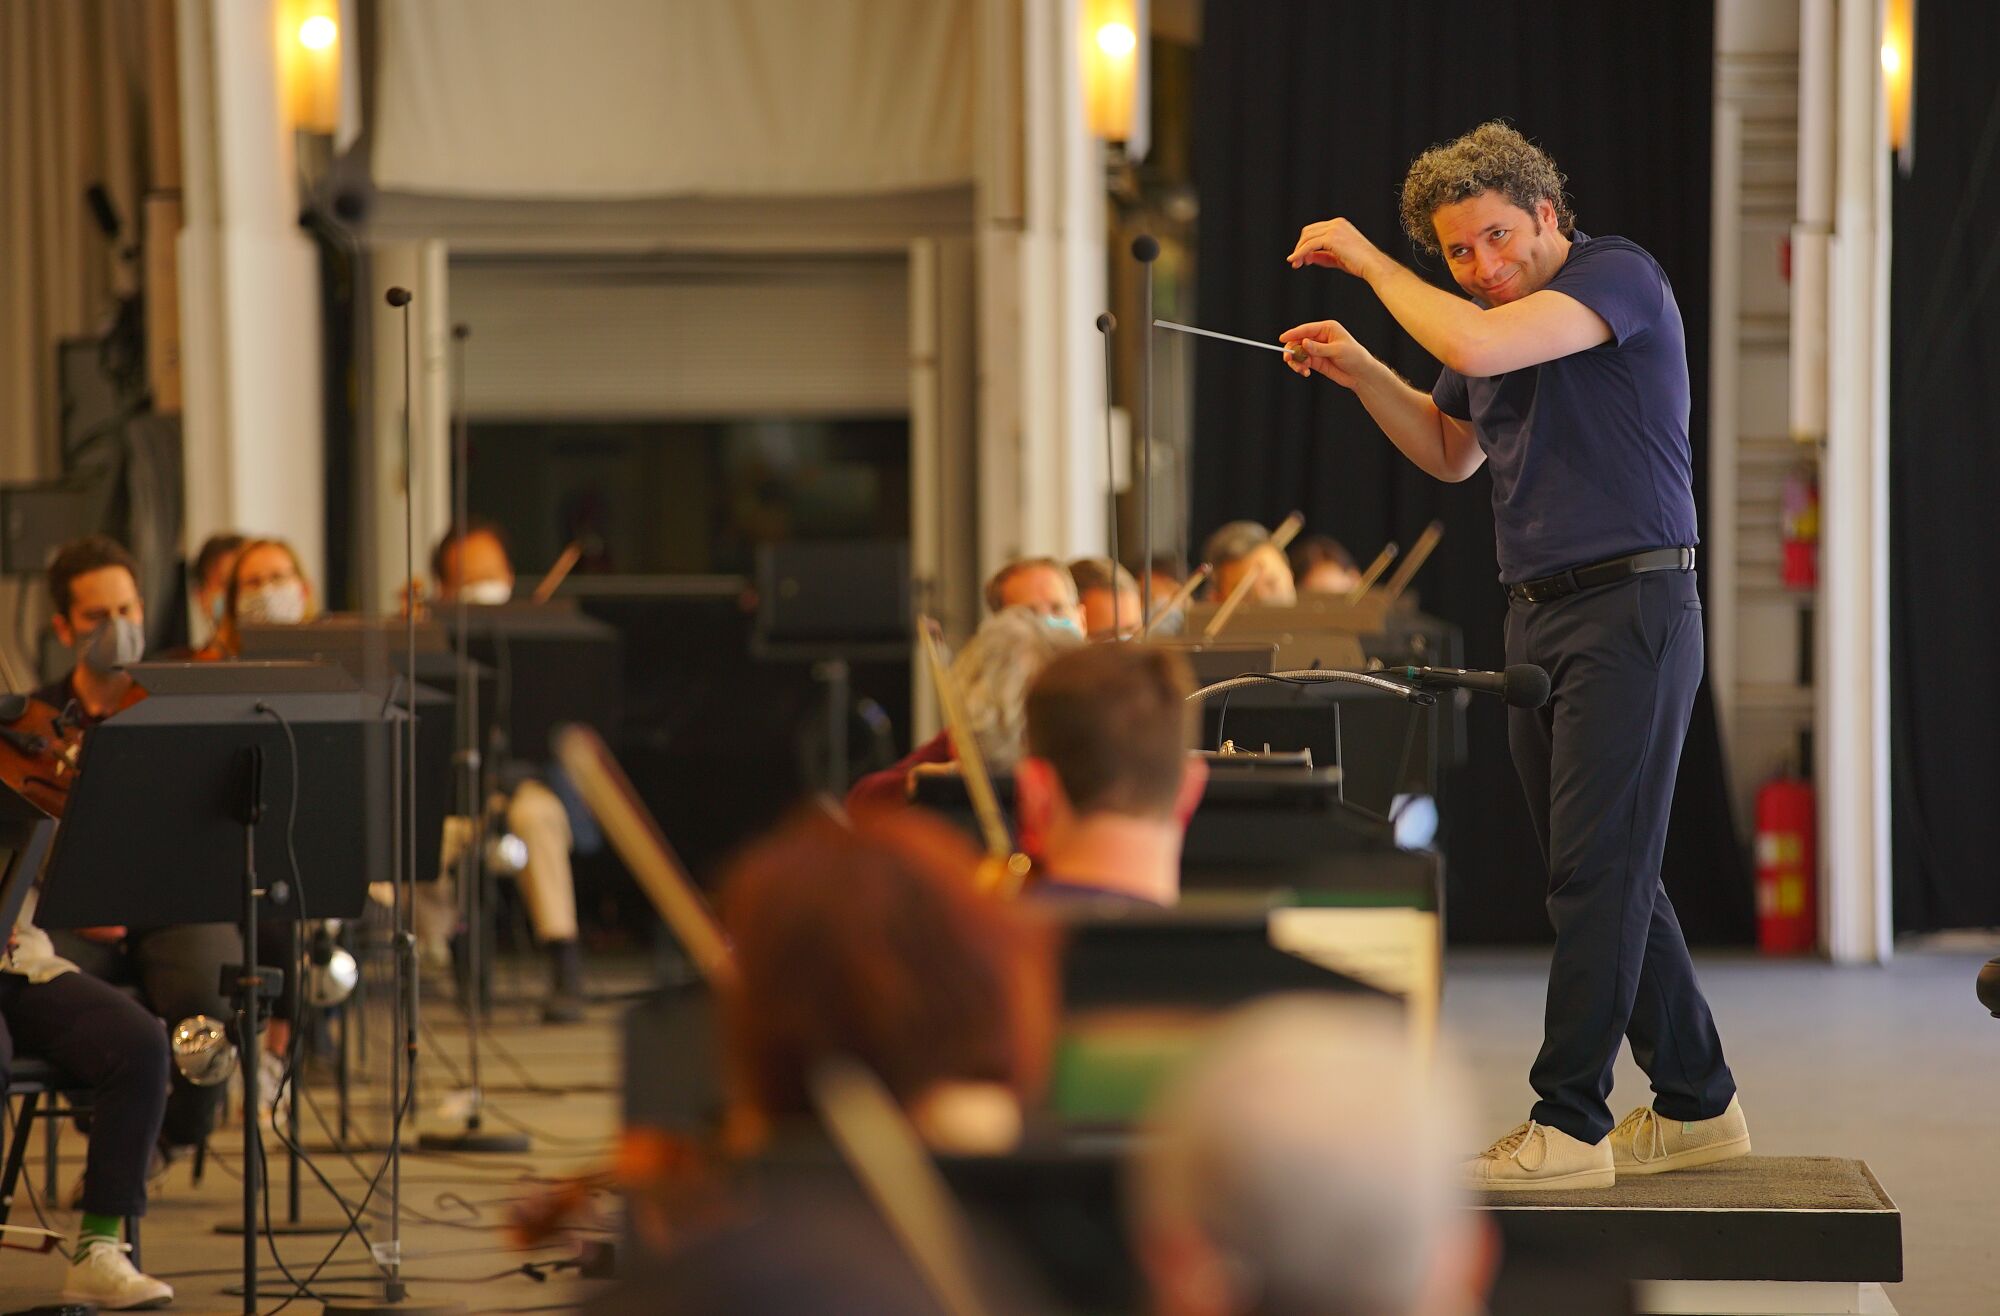 Dudamel, in tennis shoes, conducts rehearsal